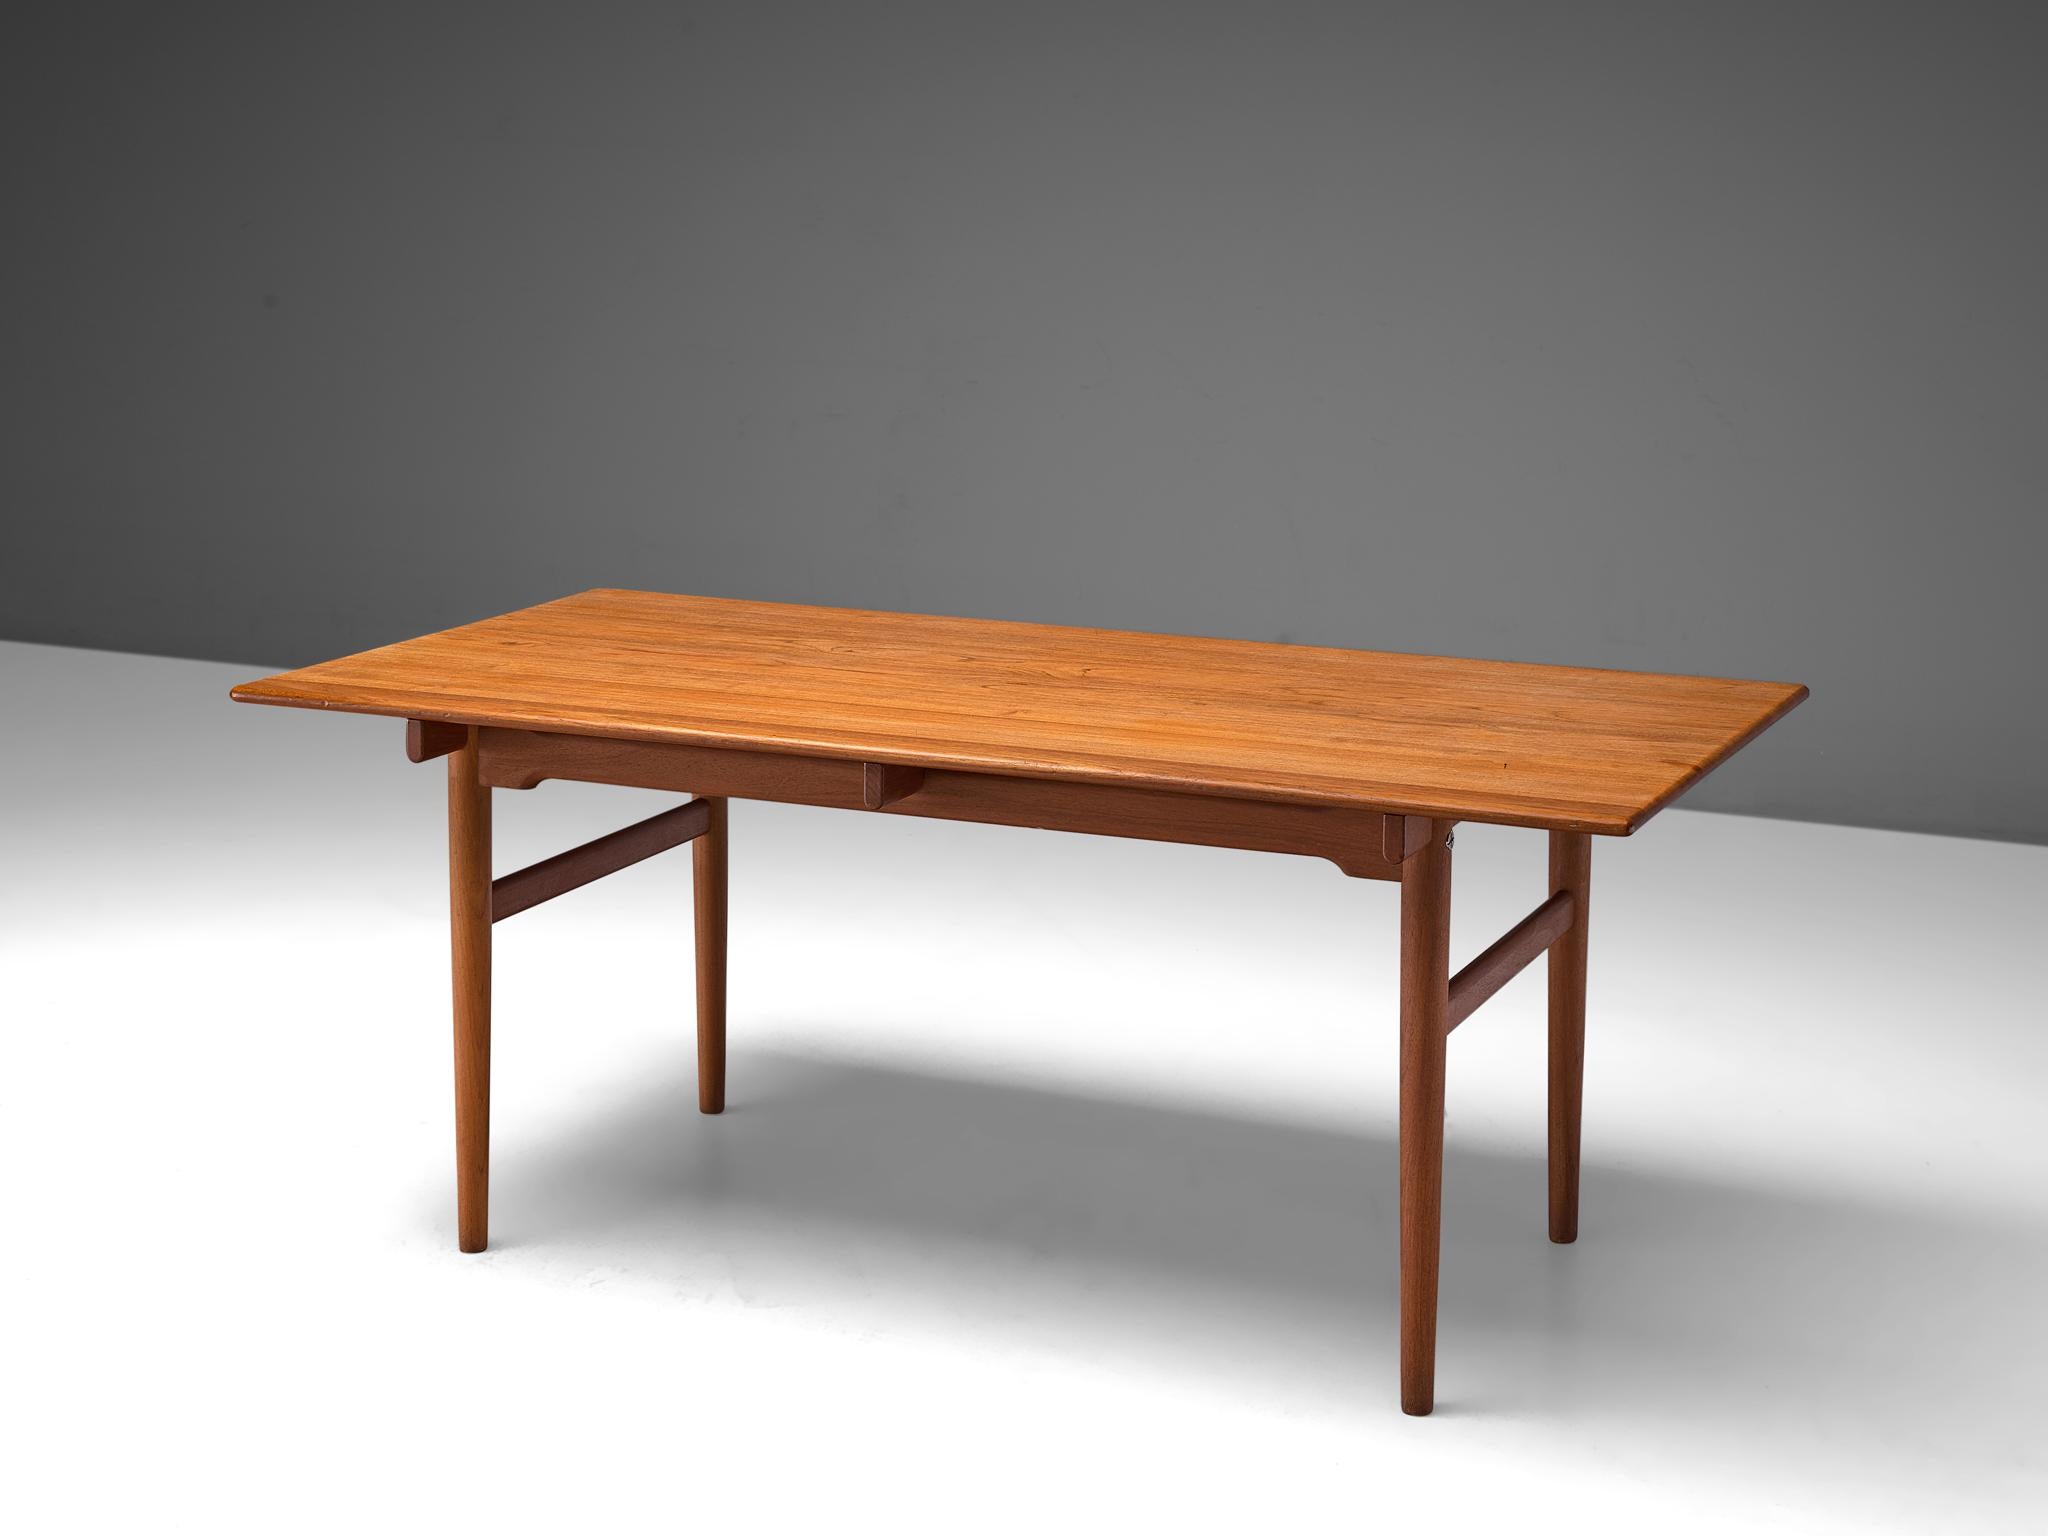 Hans J. Wegner for Andreas Tuck, dining table, teak, Denmark, 1955.

Dining table with straight tapered legs, by the Danish Designer Hans Wegner. This table is considered as an iconic architectural design by Wegner as he experimented in this model